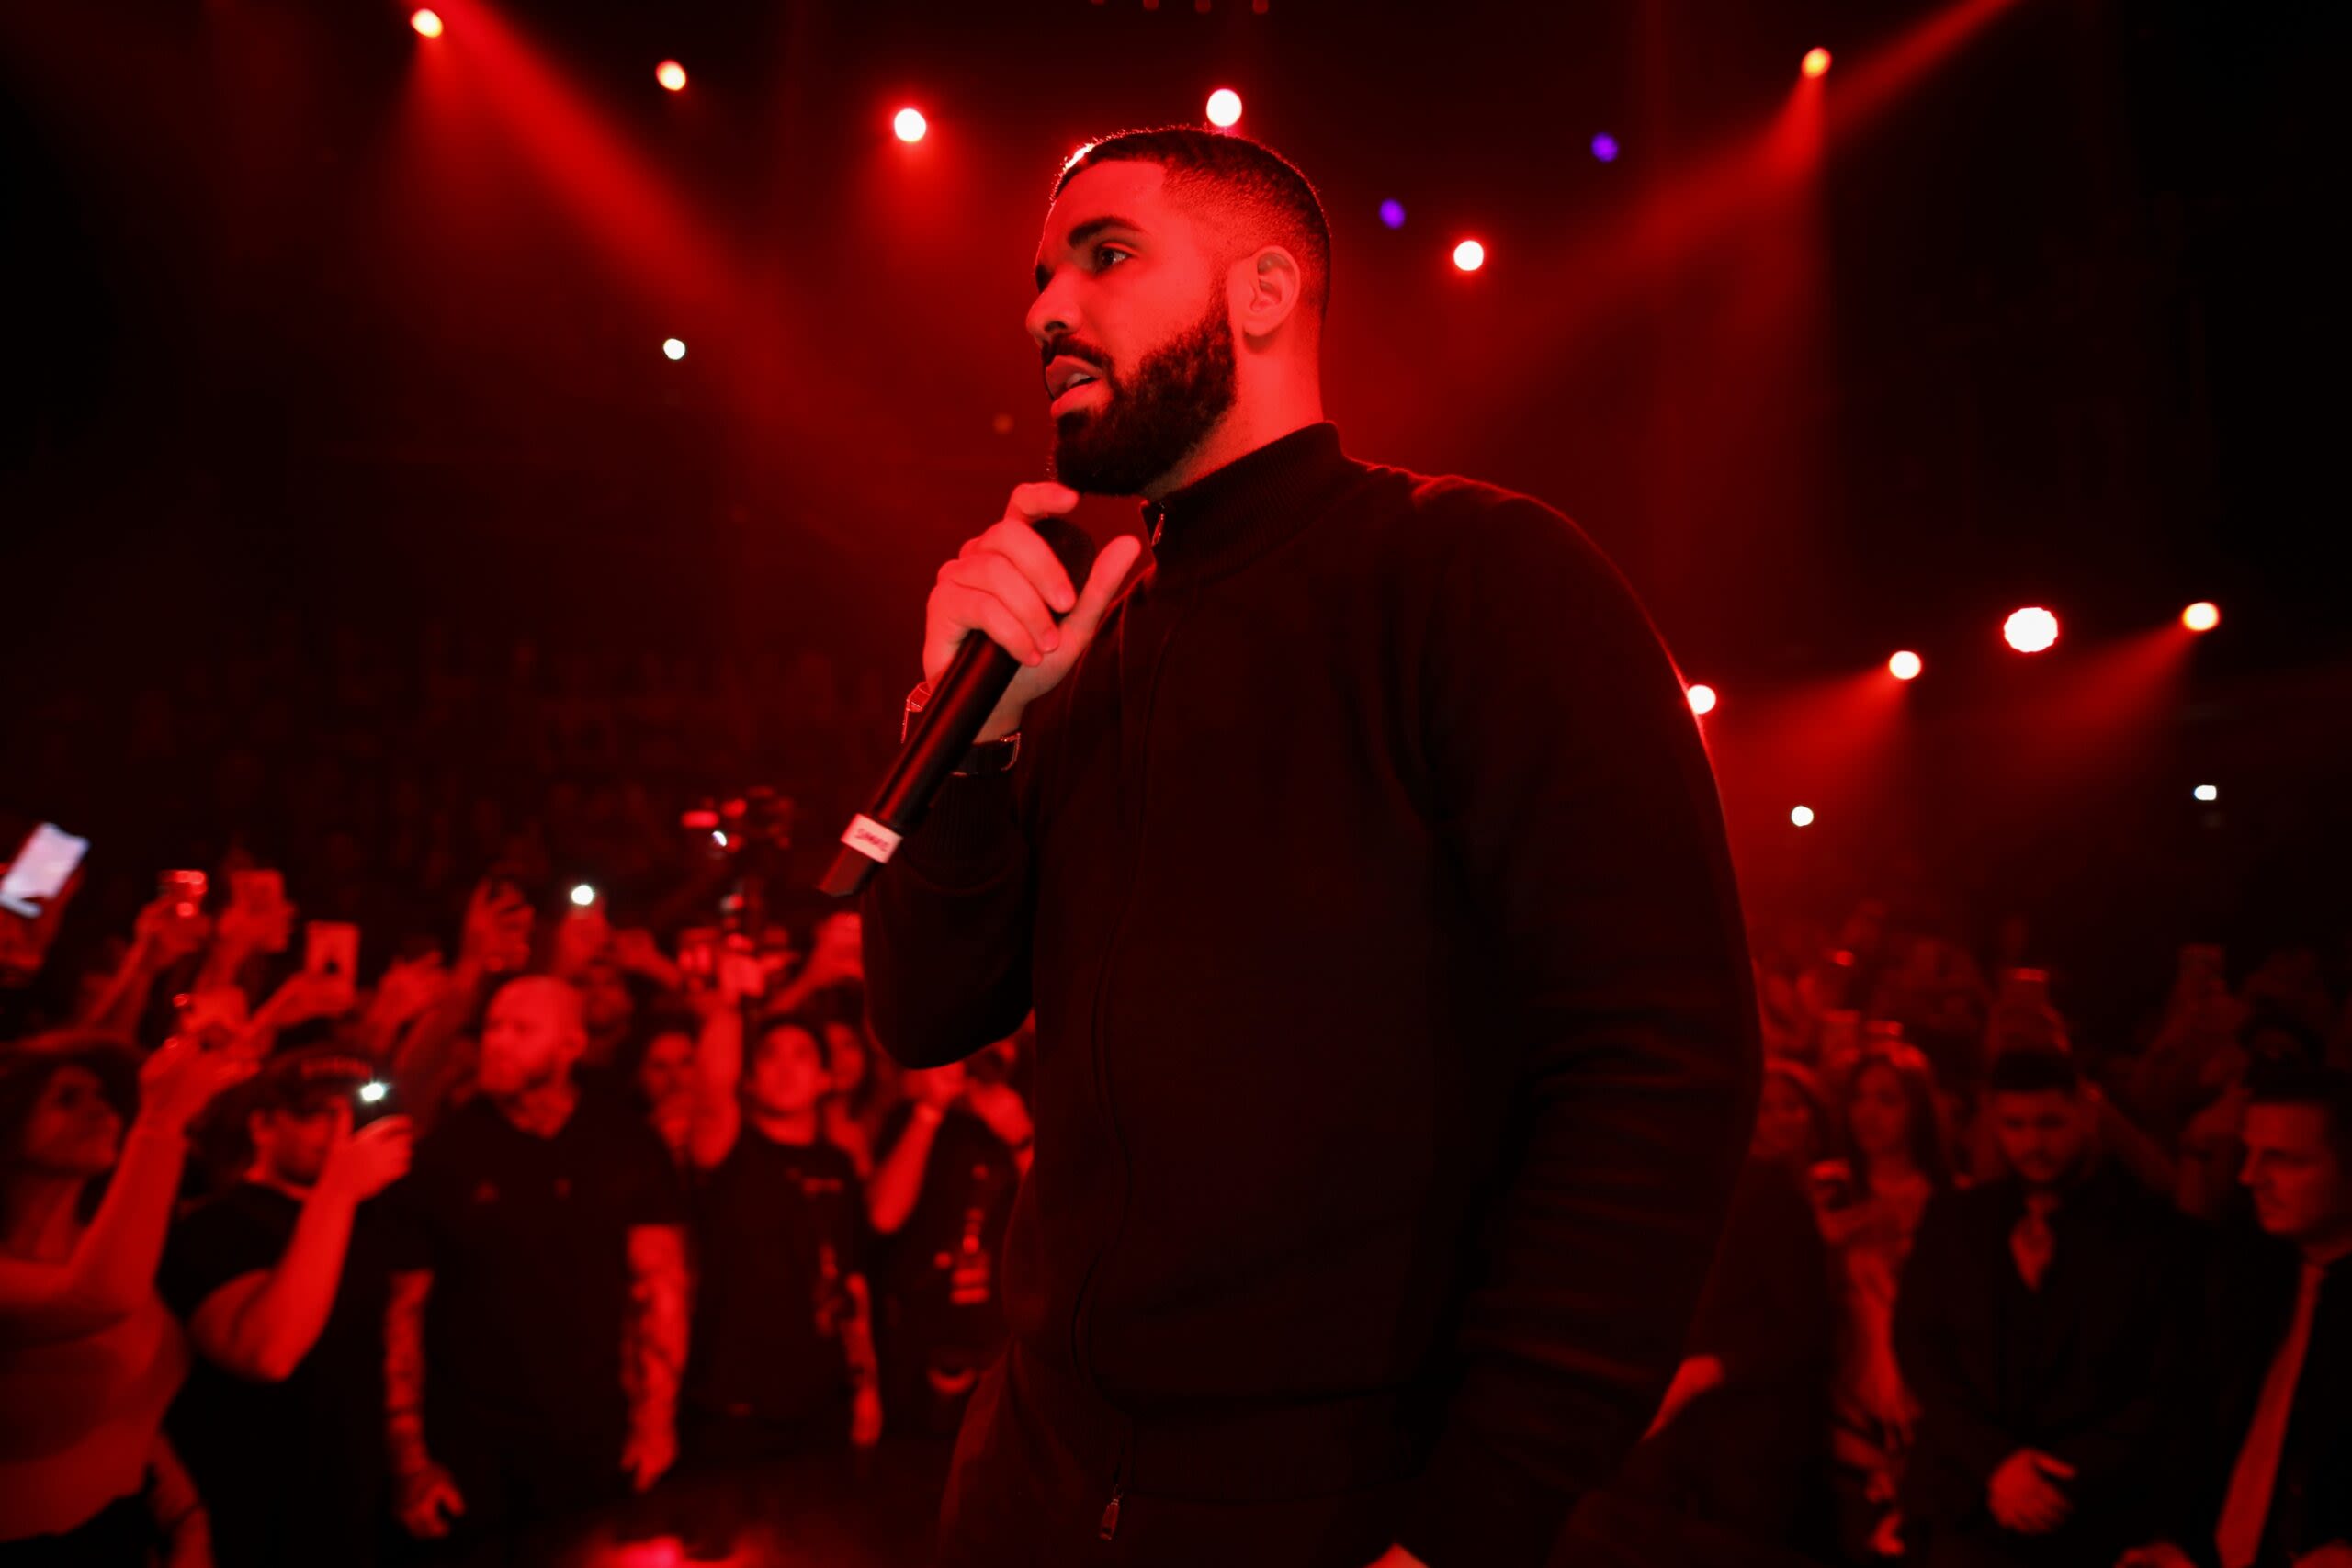 Concertgoer Addresses Onstage Kiss With Drake At 17 Years Old